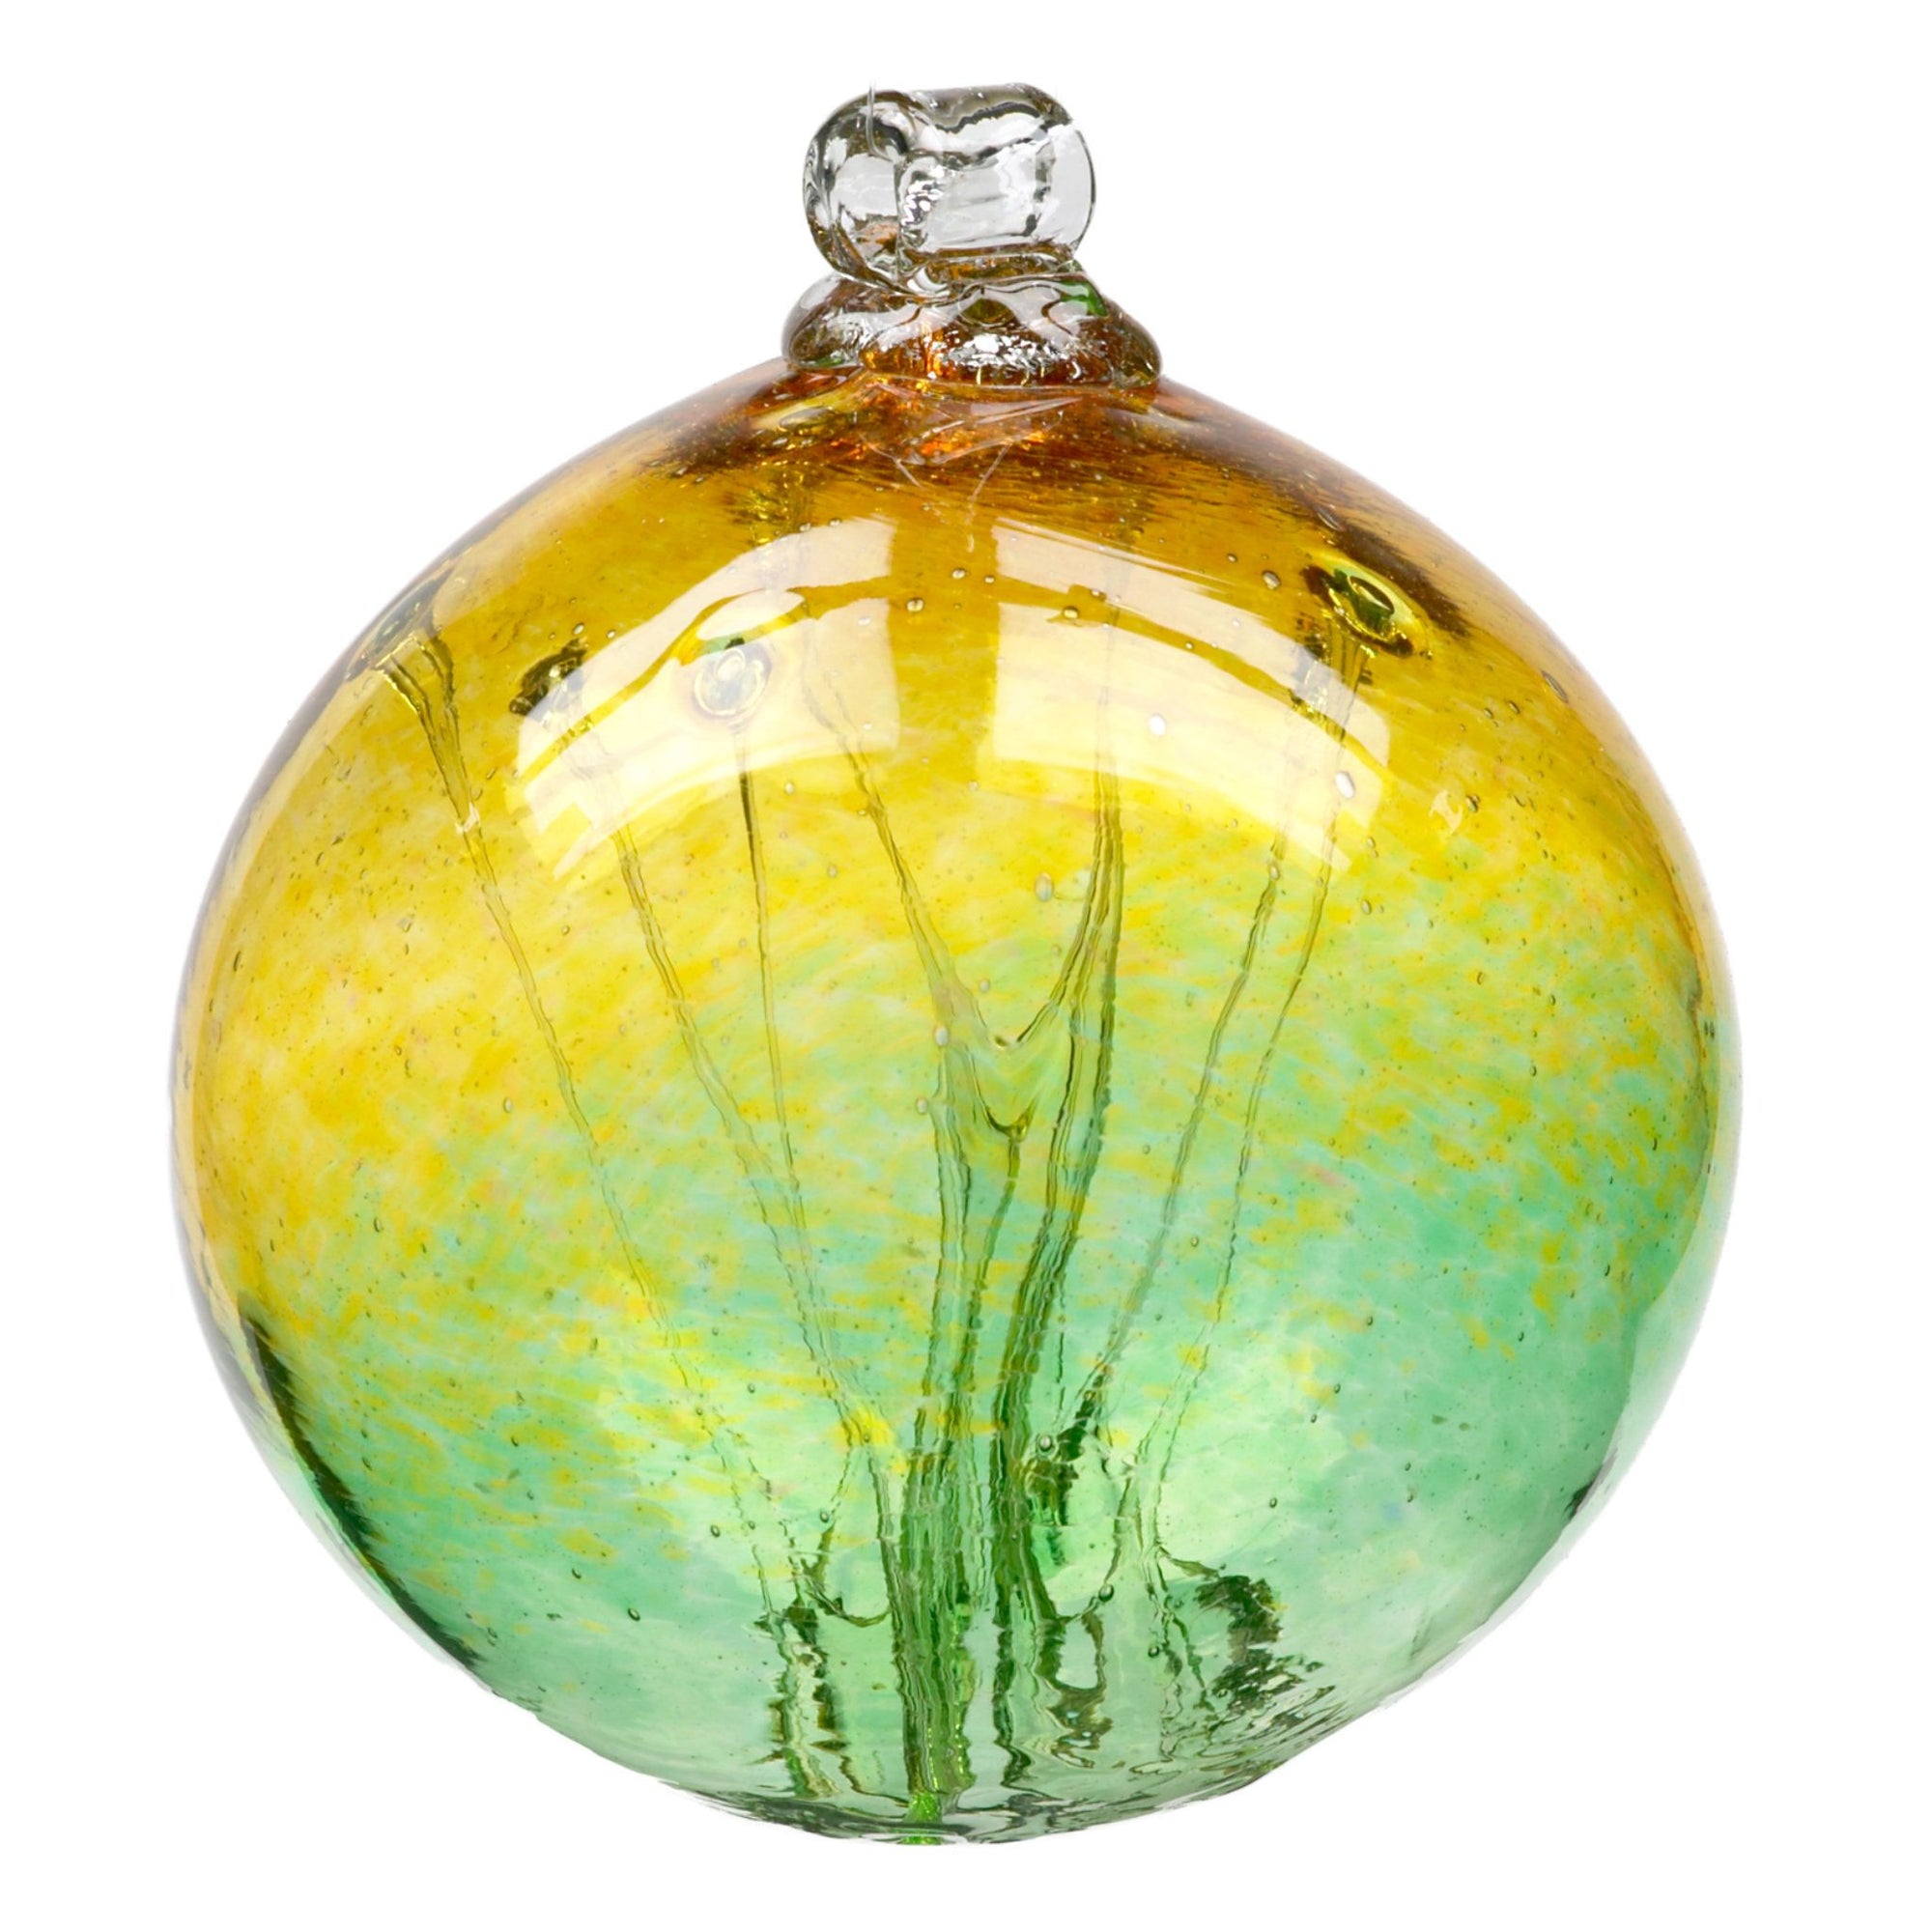 Olde English Witch Ball | Gold/Green Hand-blown Art Glass Ornament